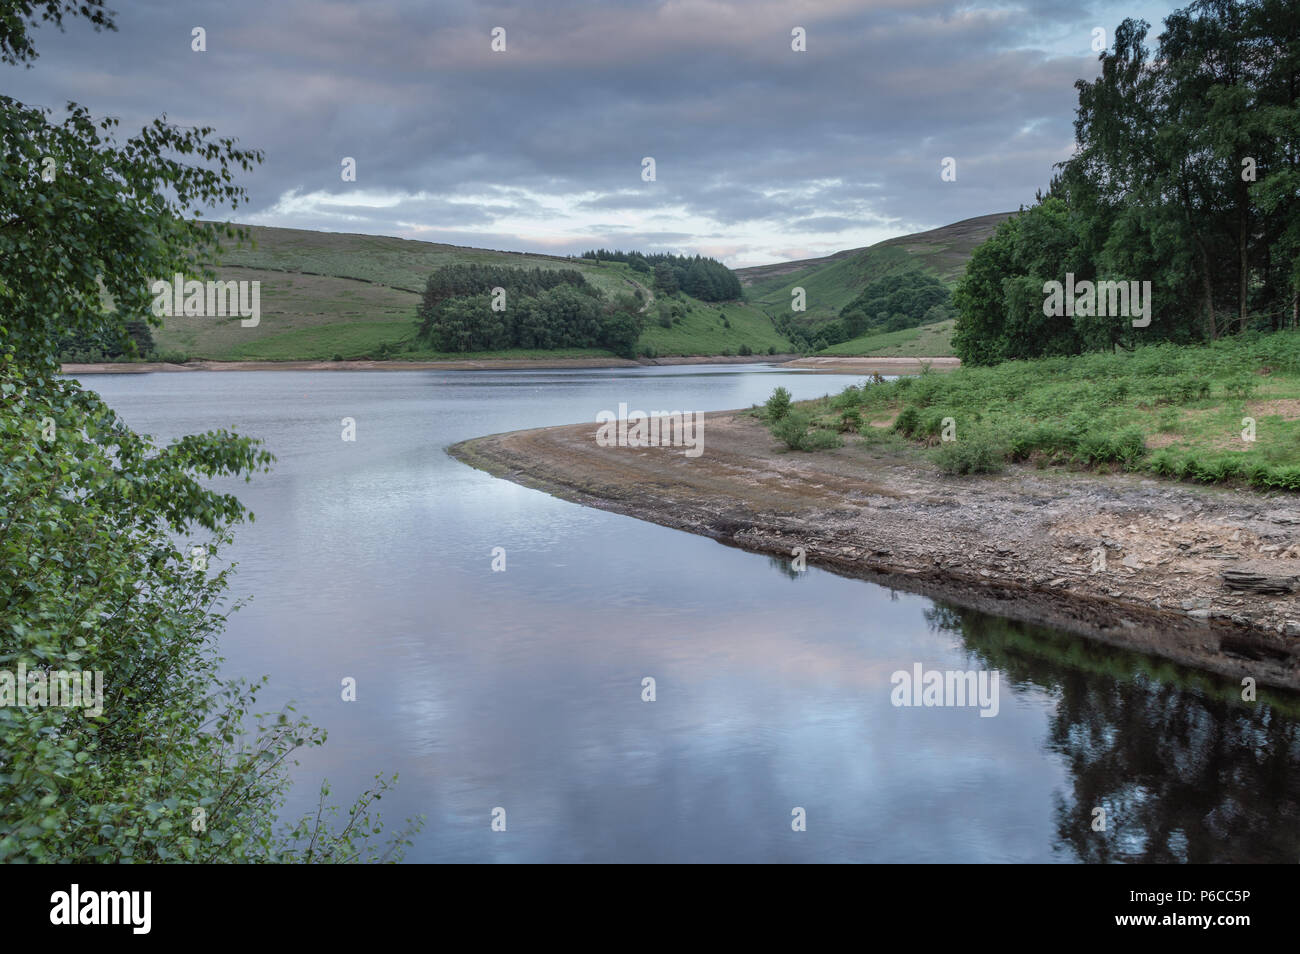 The reservoir at Goyt valley within the Peak District National park. Stock Photo